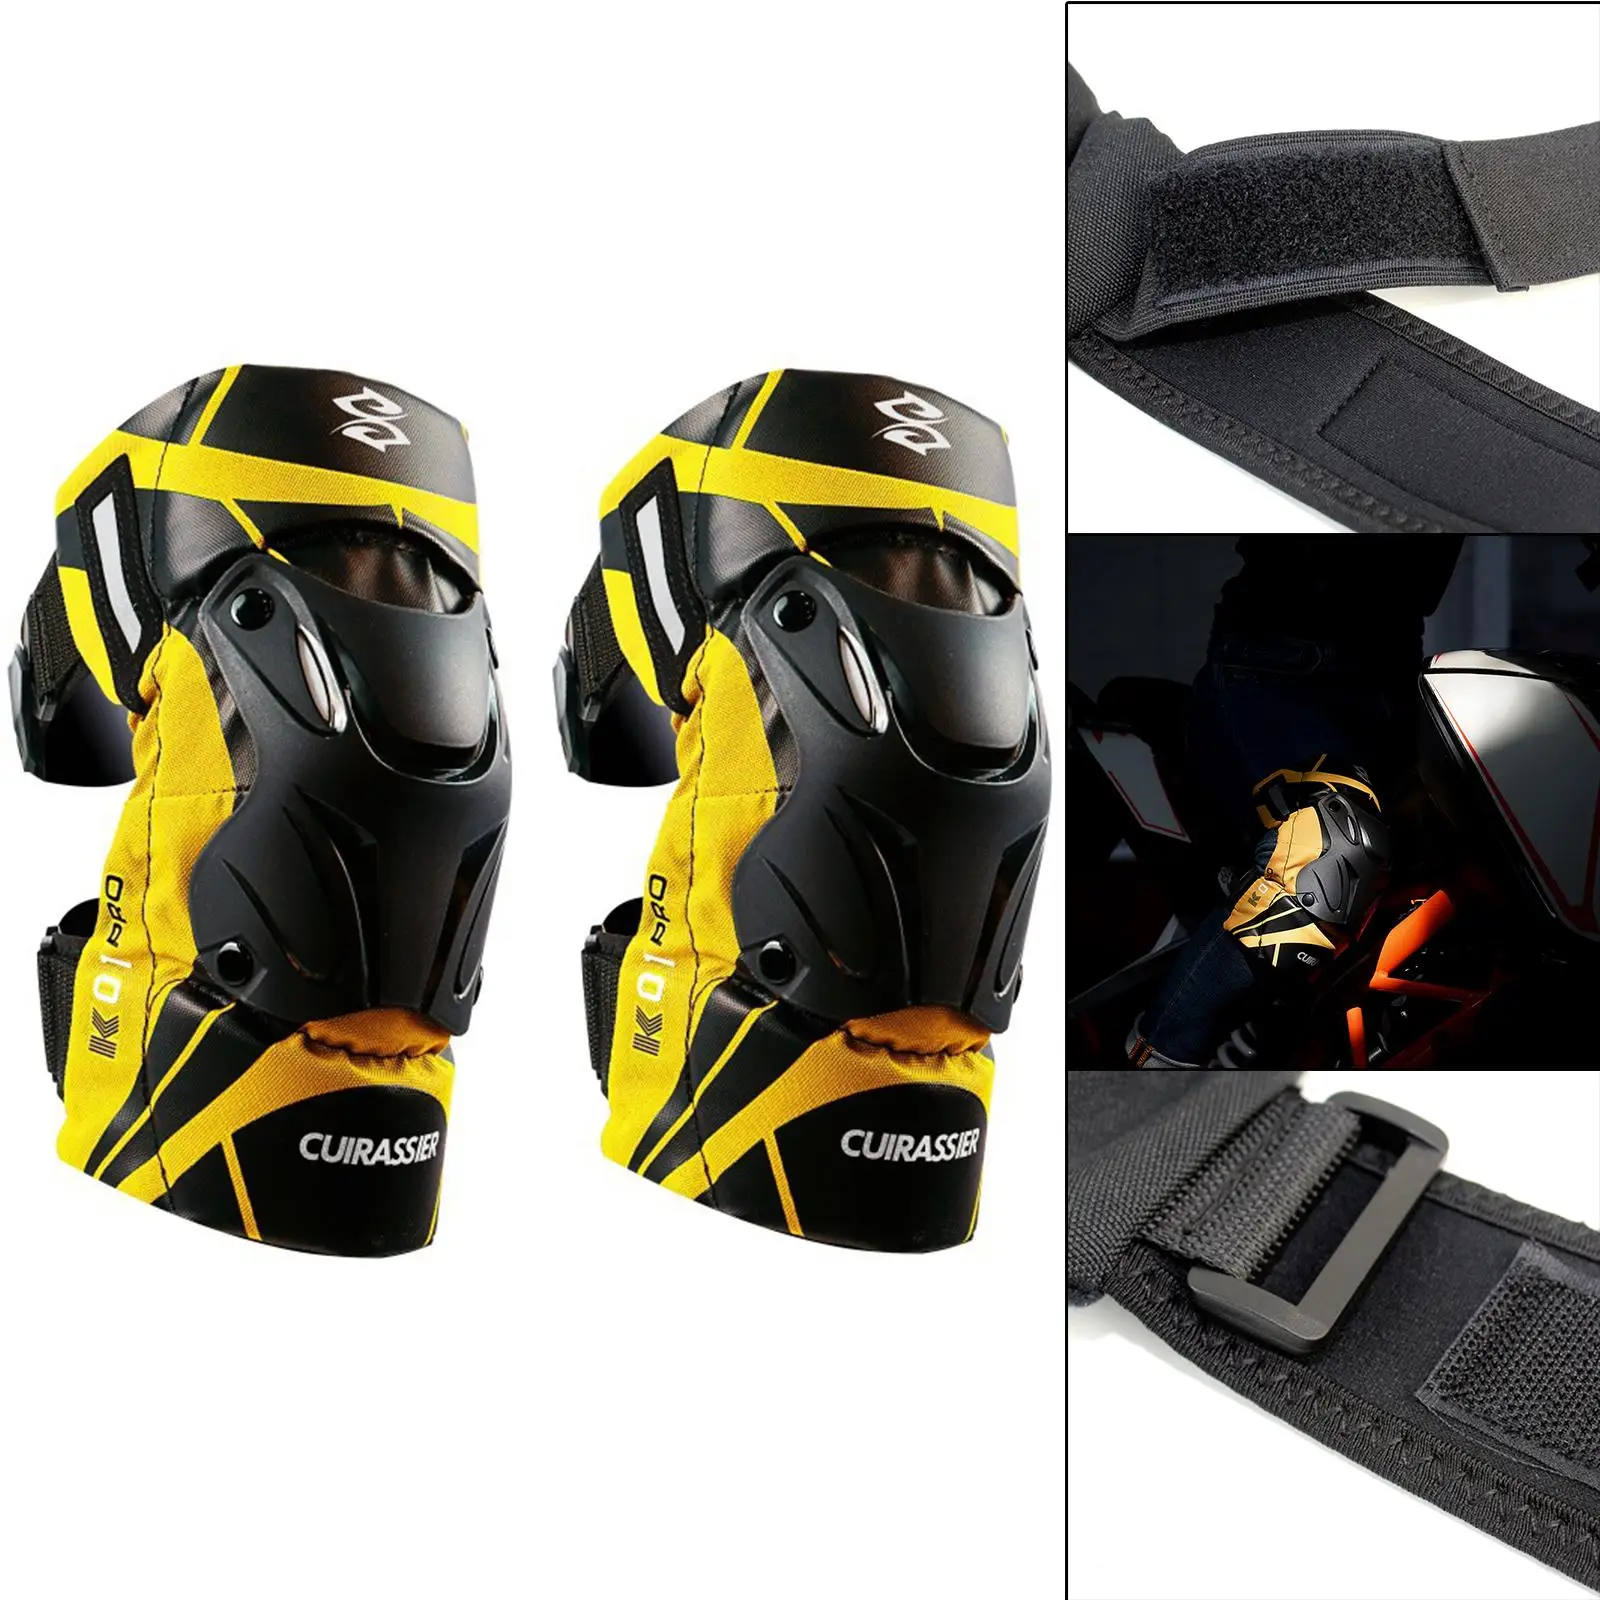 2 Pieces K01-3 Motorcycle Knee Pads Protection Adjustable Guard for Motocross Racing Unisex Reflective Moisture Proof Adult